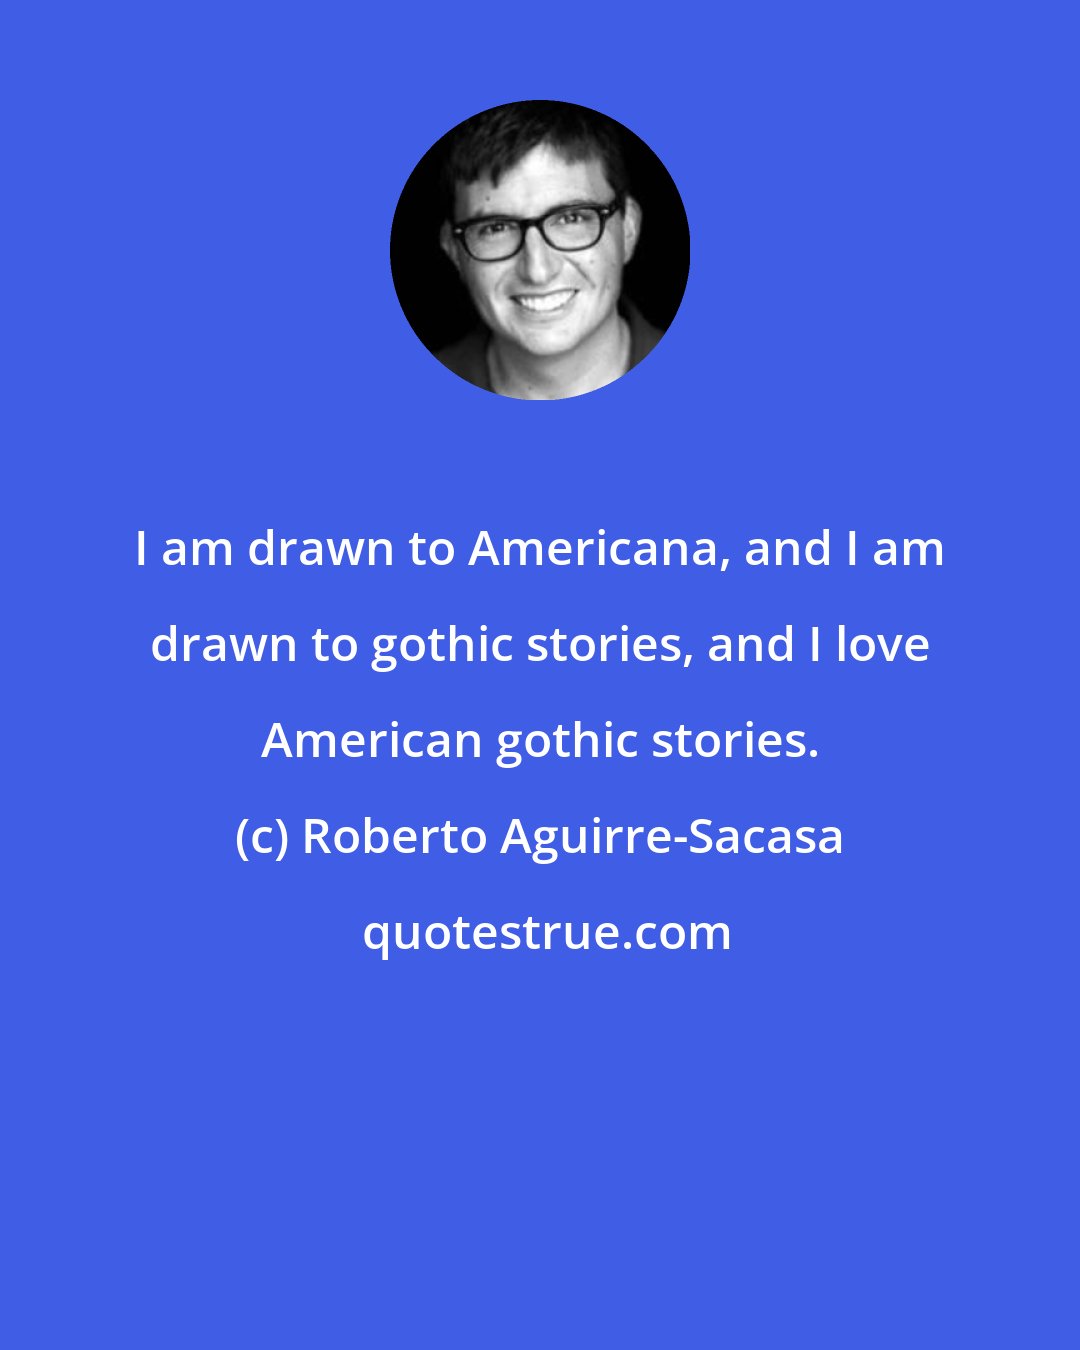 Roberto Aguirre-Sacasa: I am drawn to Americana, and I am drawn to gothic stories, and I love American gothic stories.